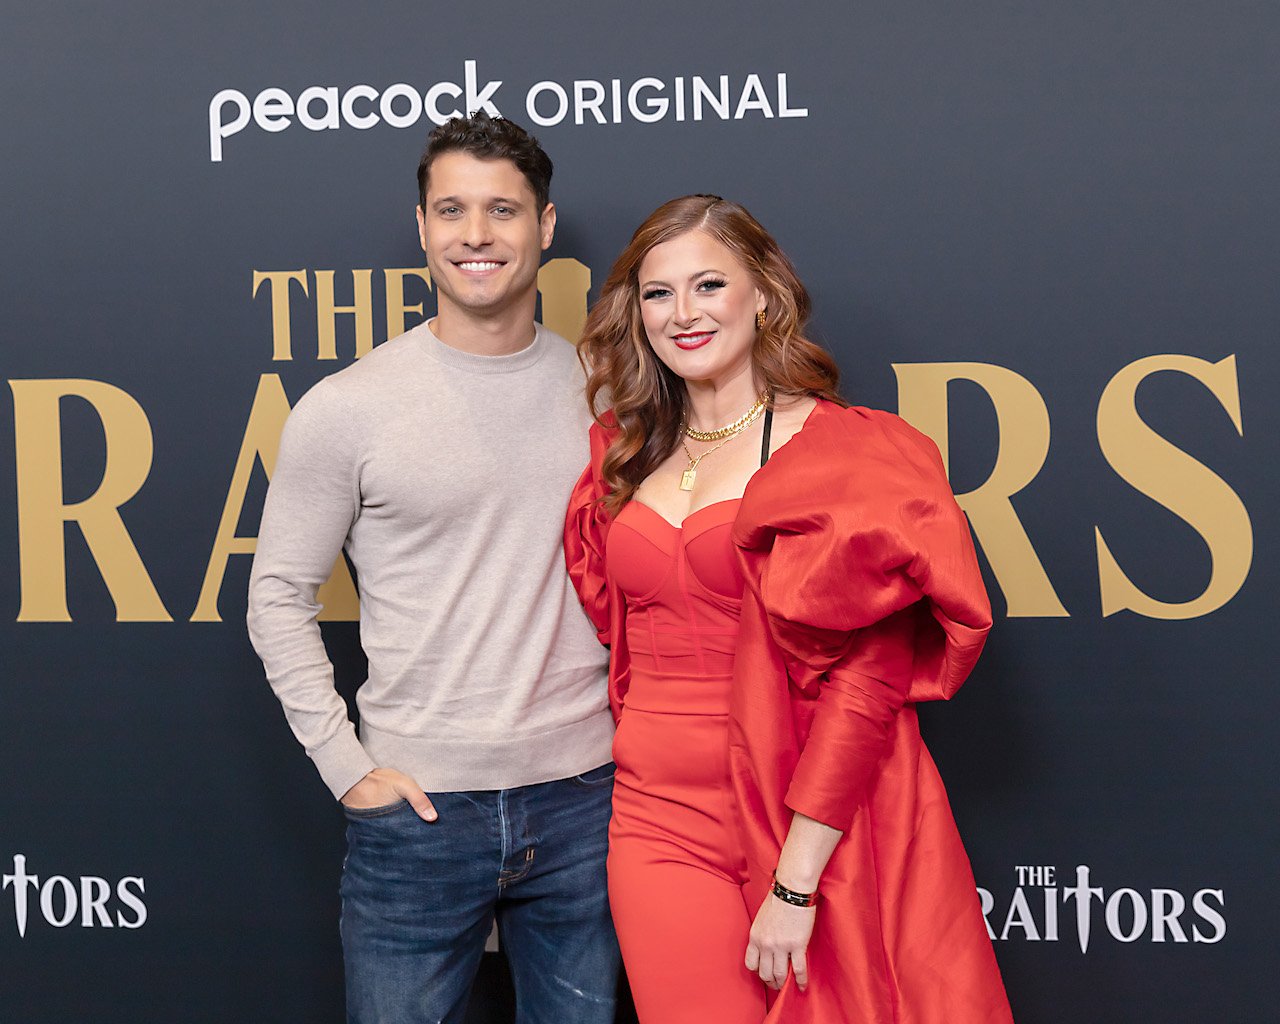 Cody Calafiore poses with Rachel Reilly on the red carpet of 'The Traitors'.